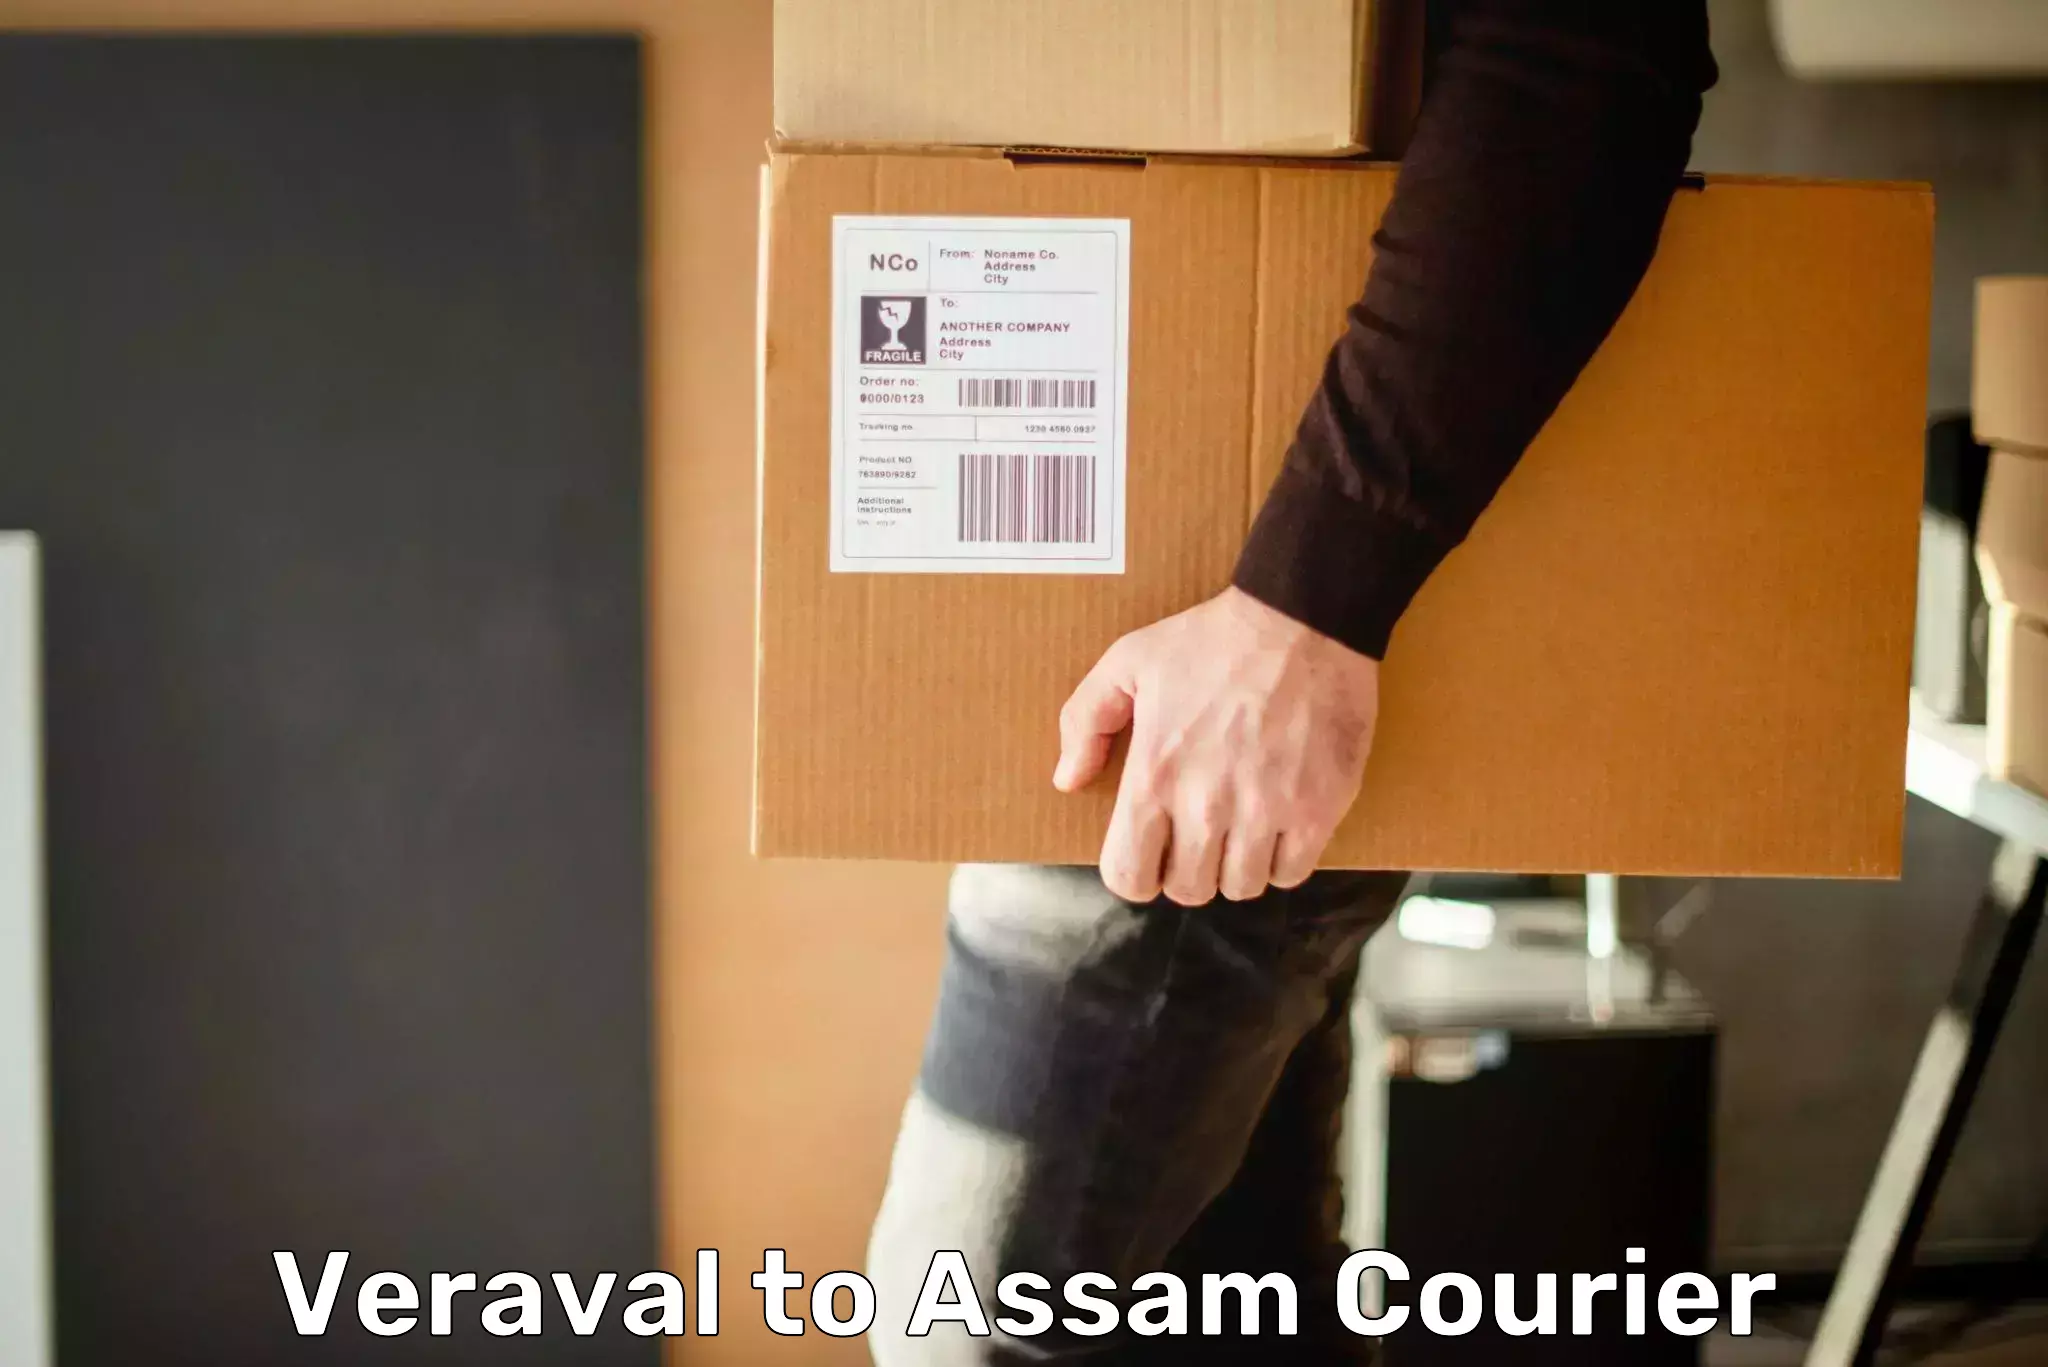 Comprehensive shipping network Veraval to Assam